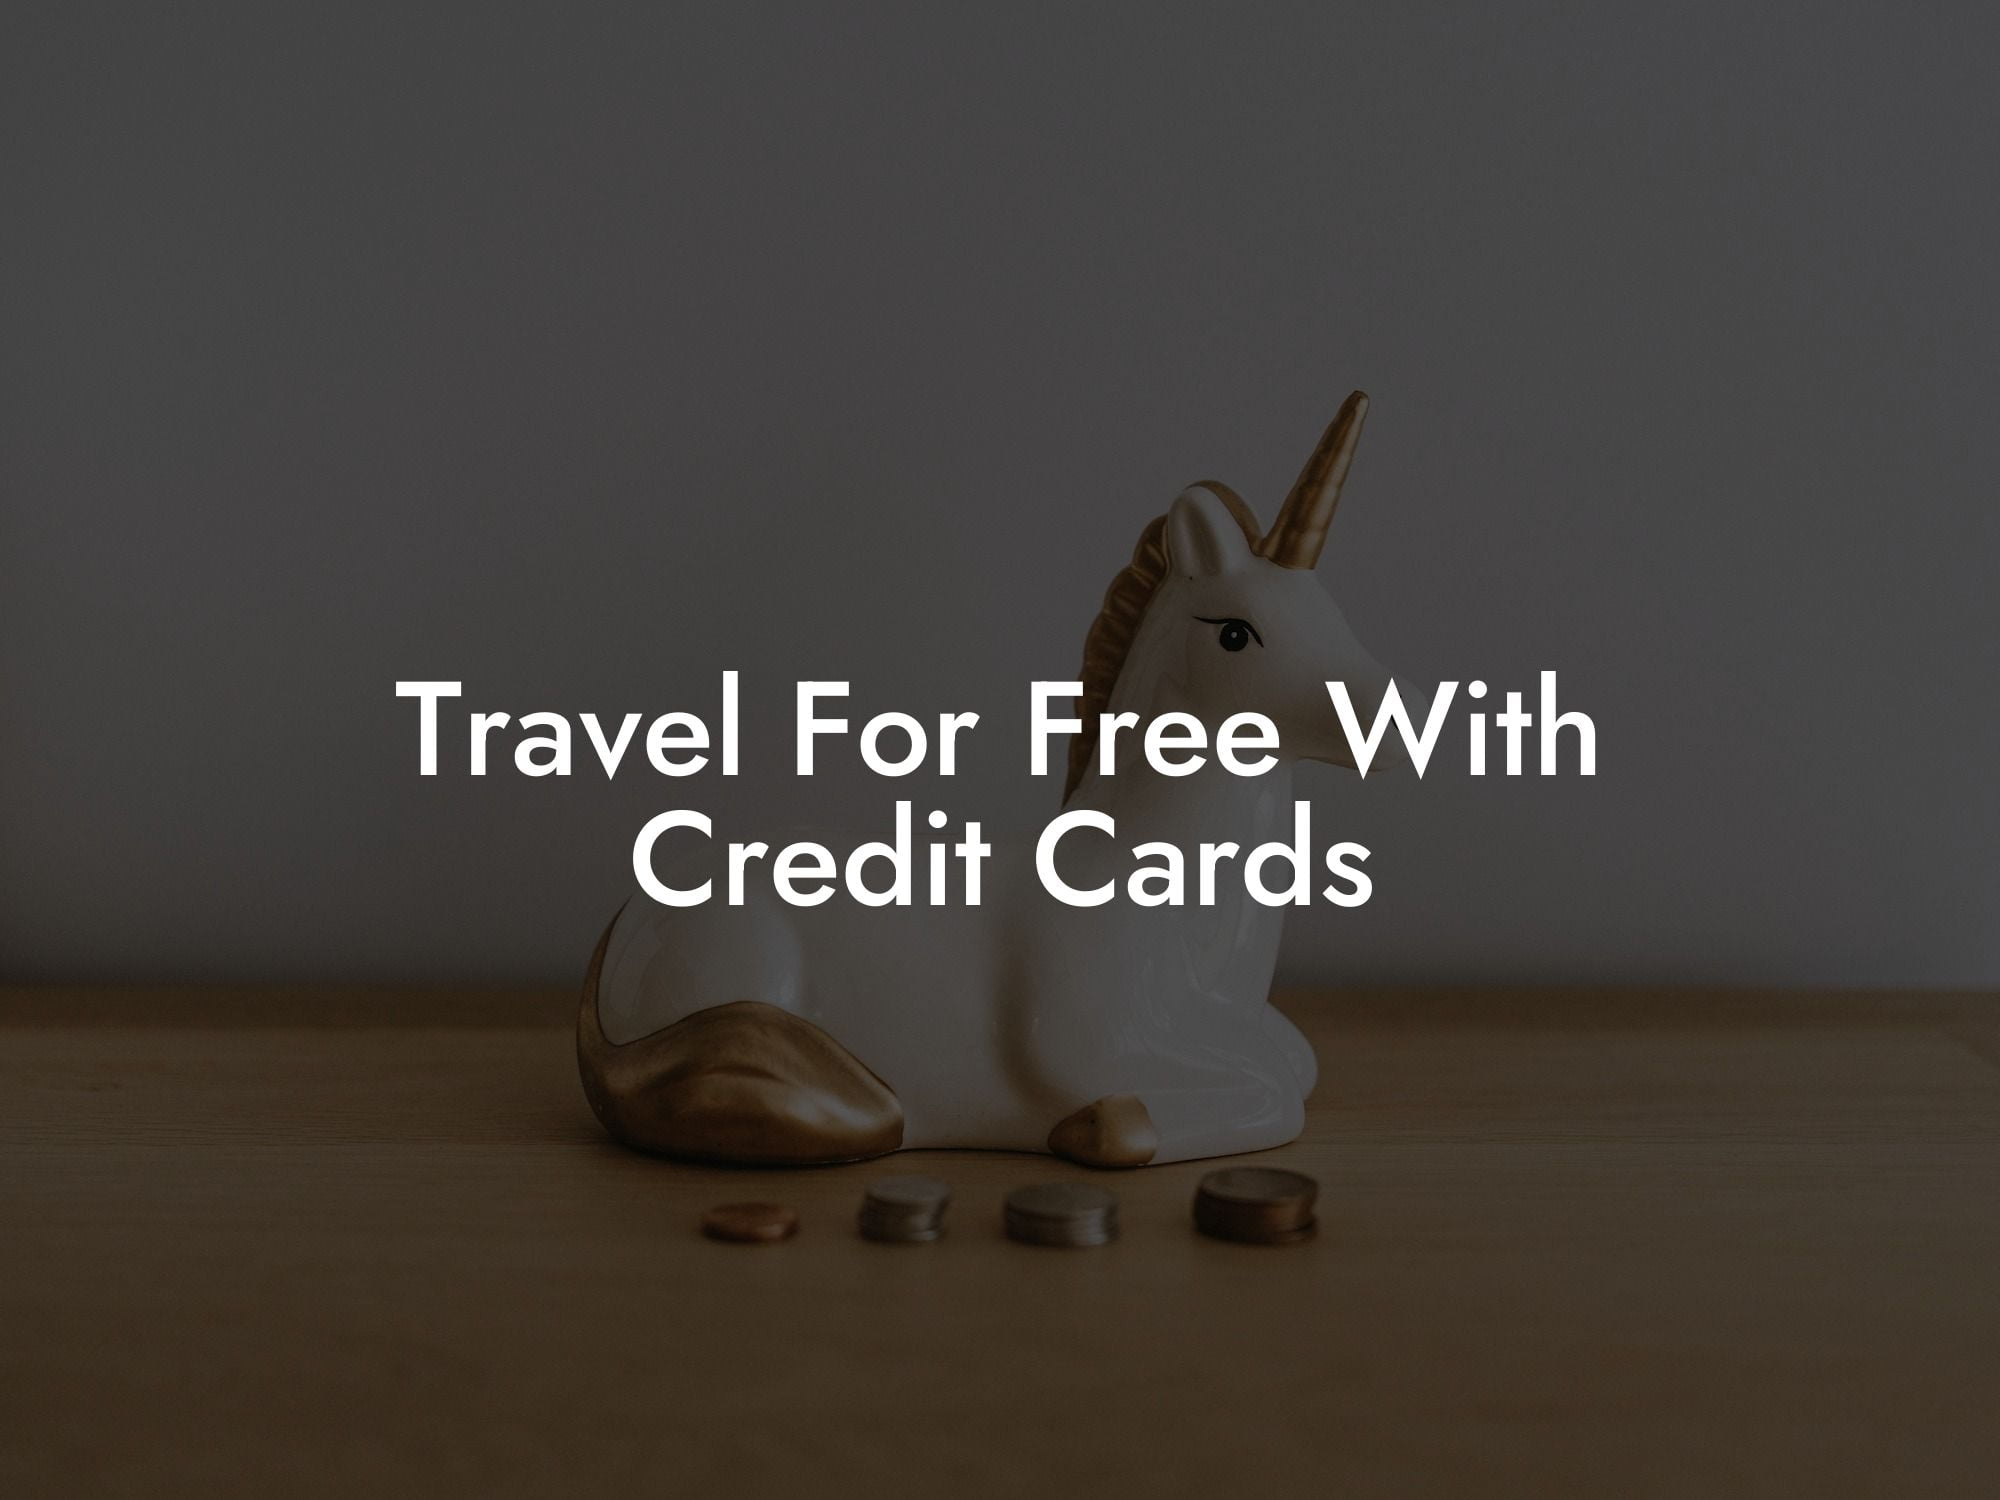 Travel For Free With Credit Cards